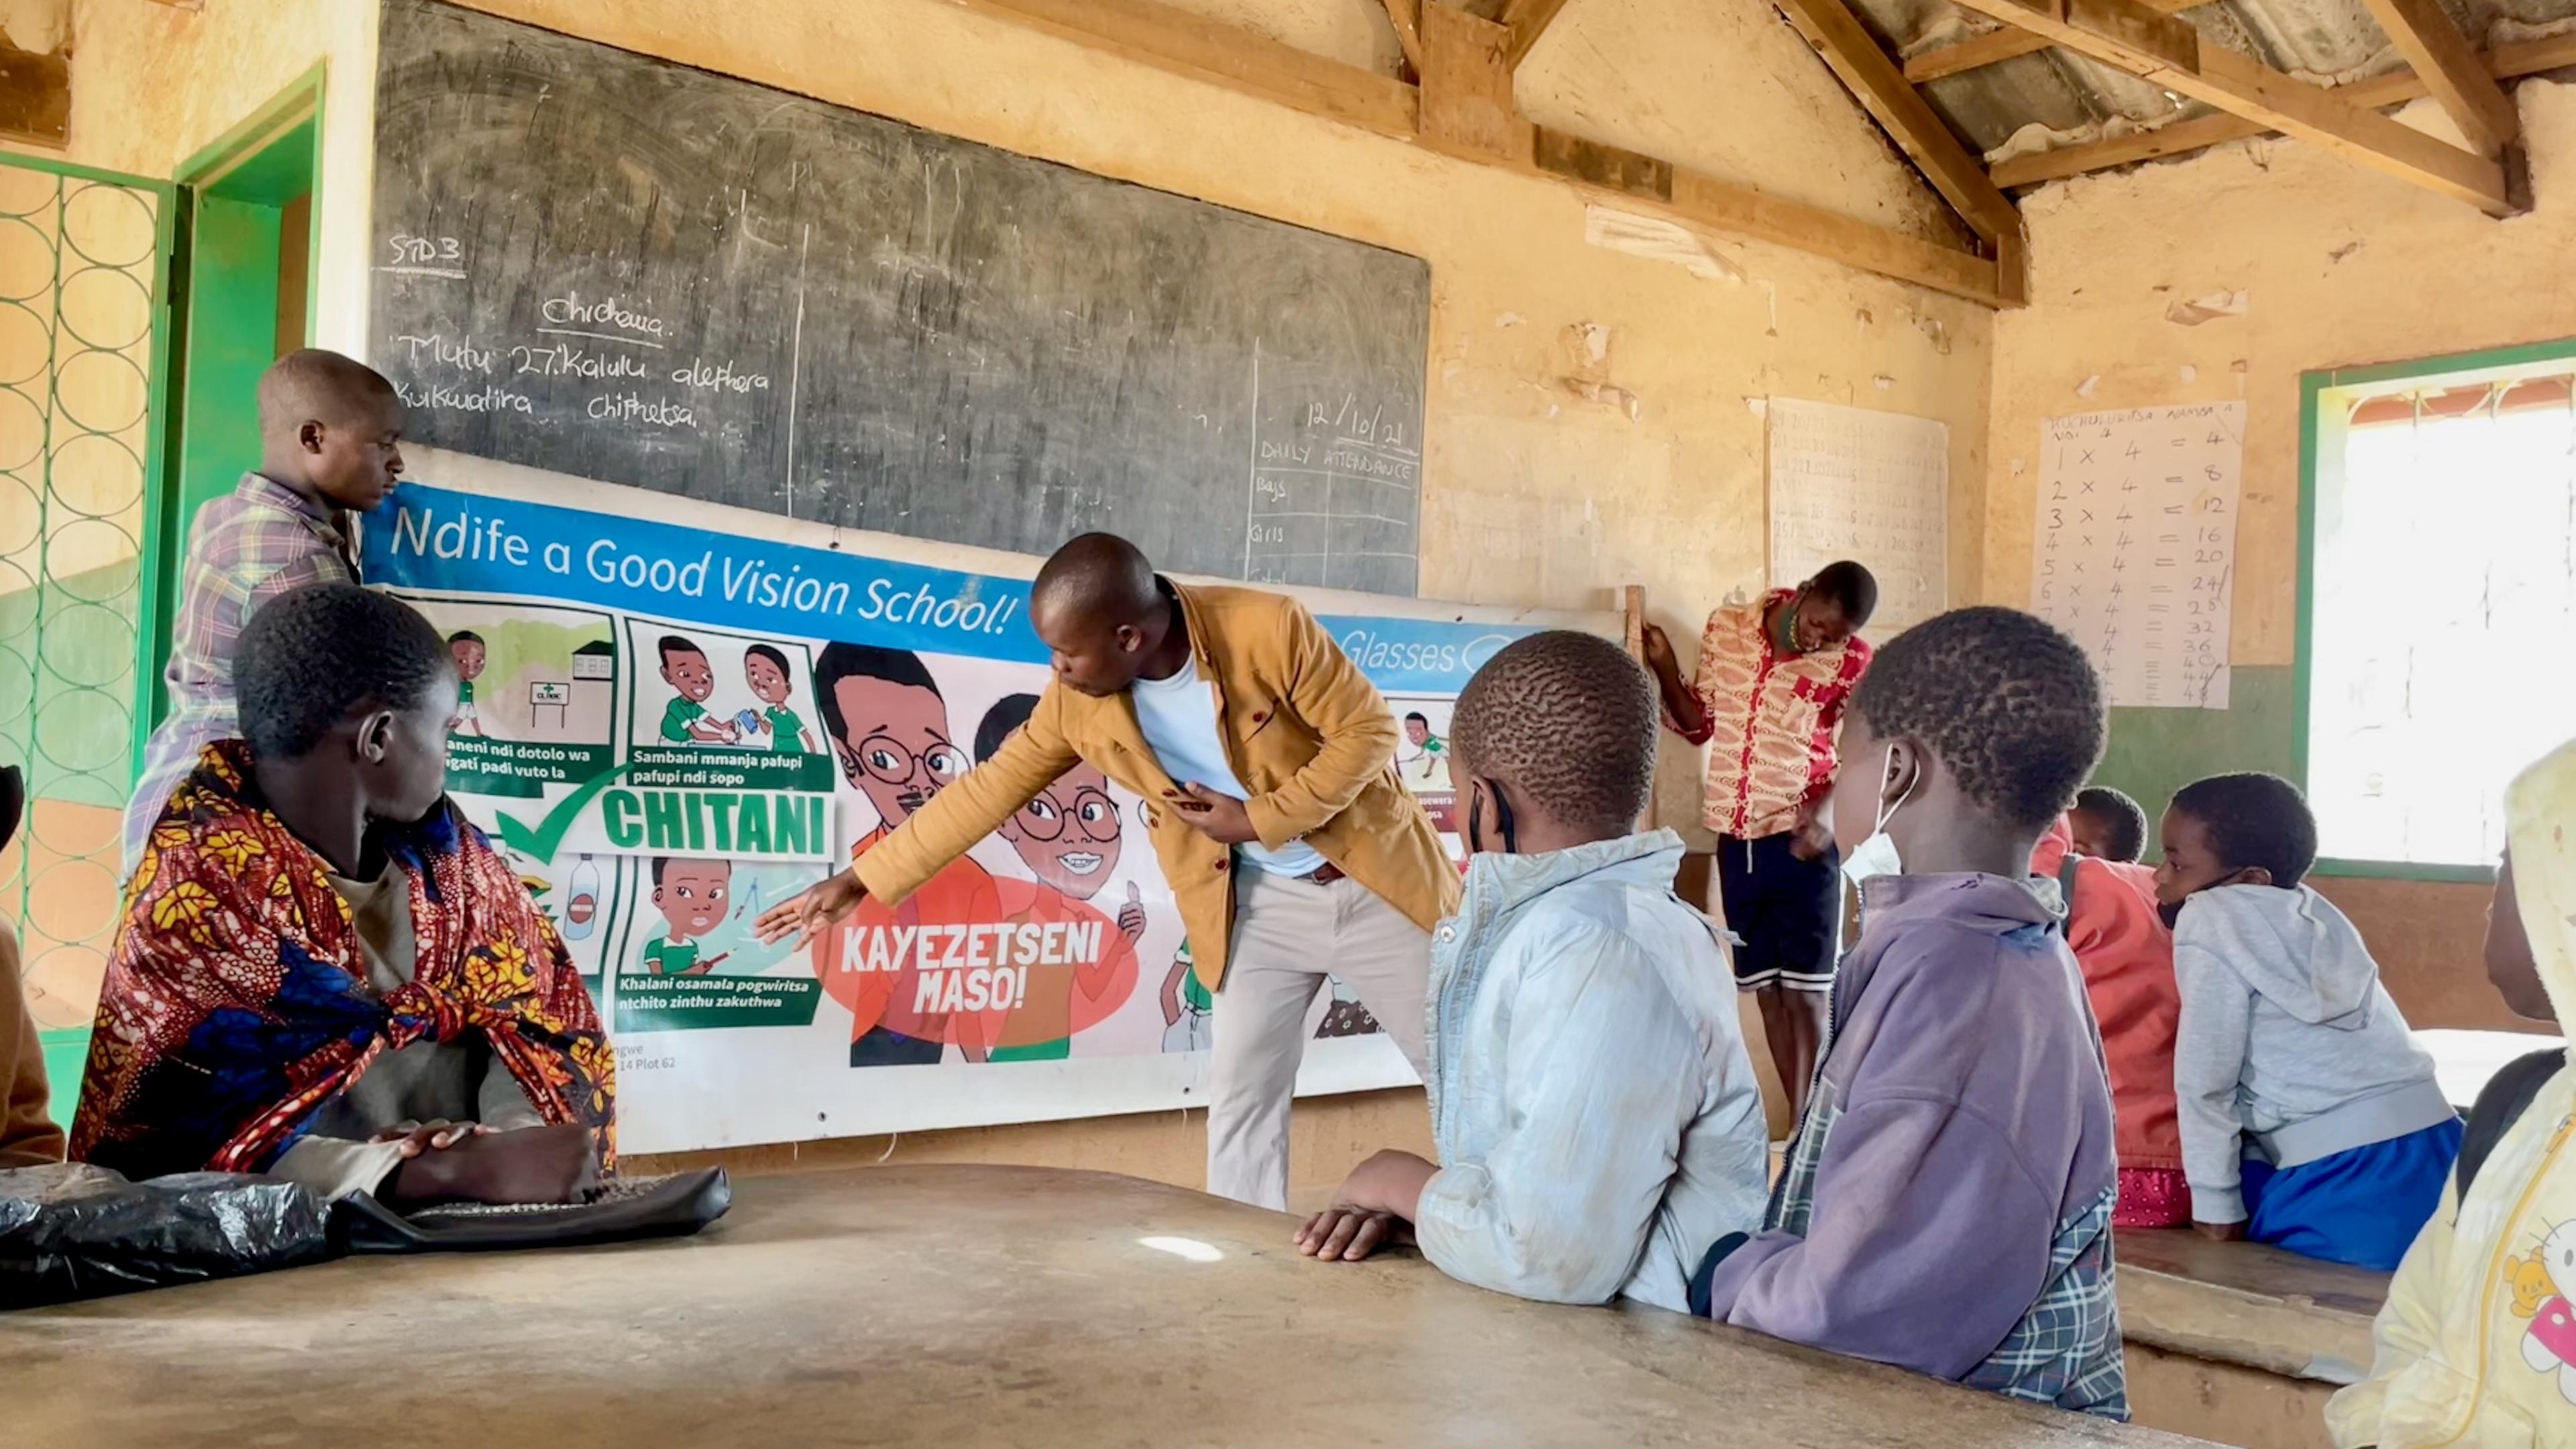 Teacher educates pupils about eye health in the classroom